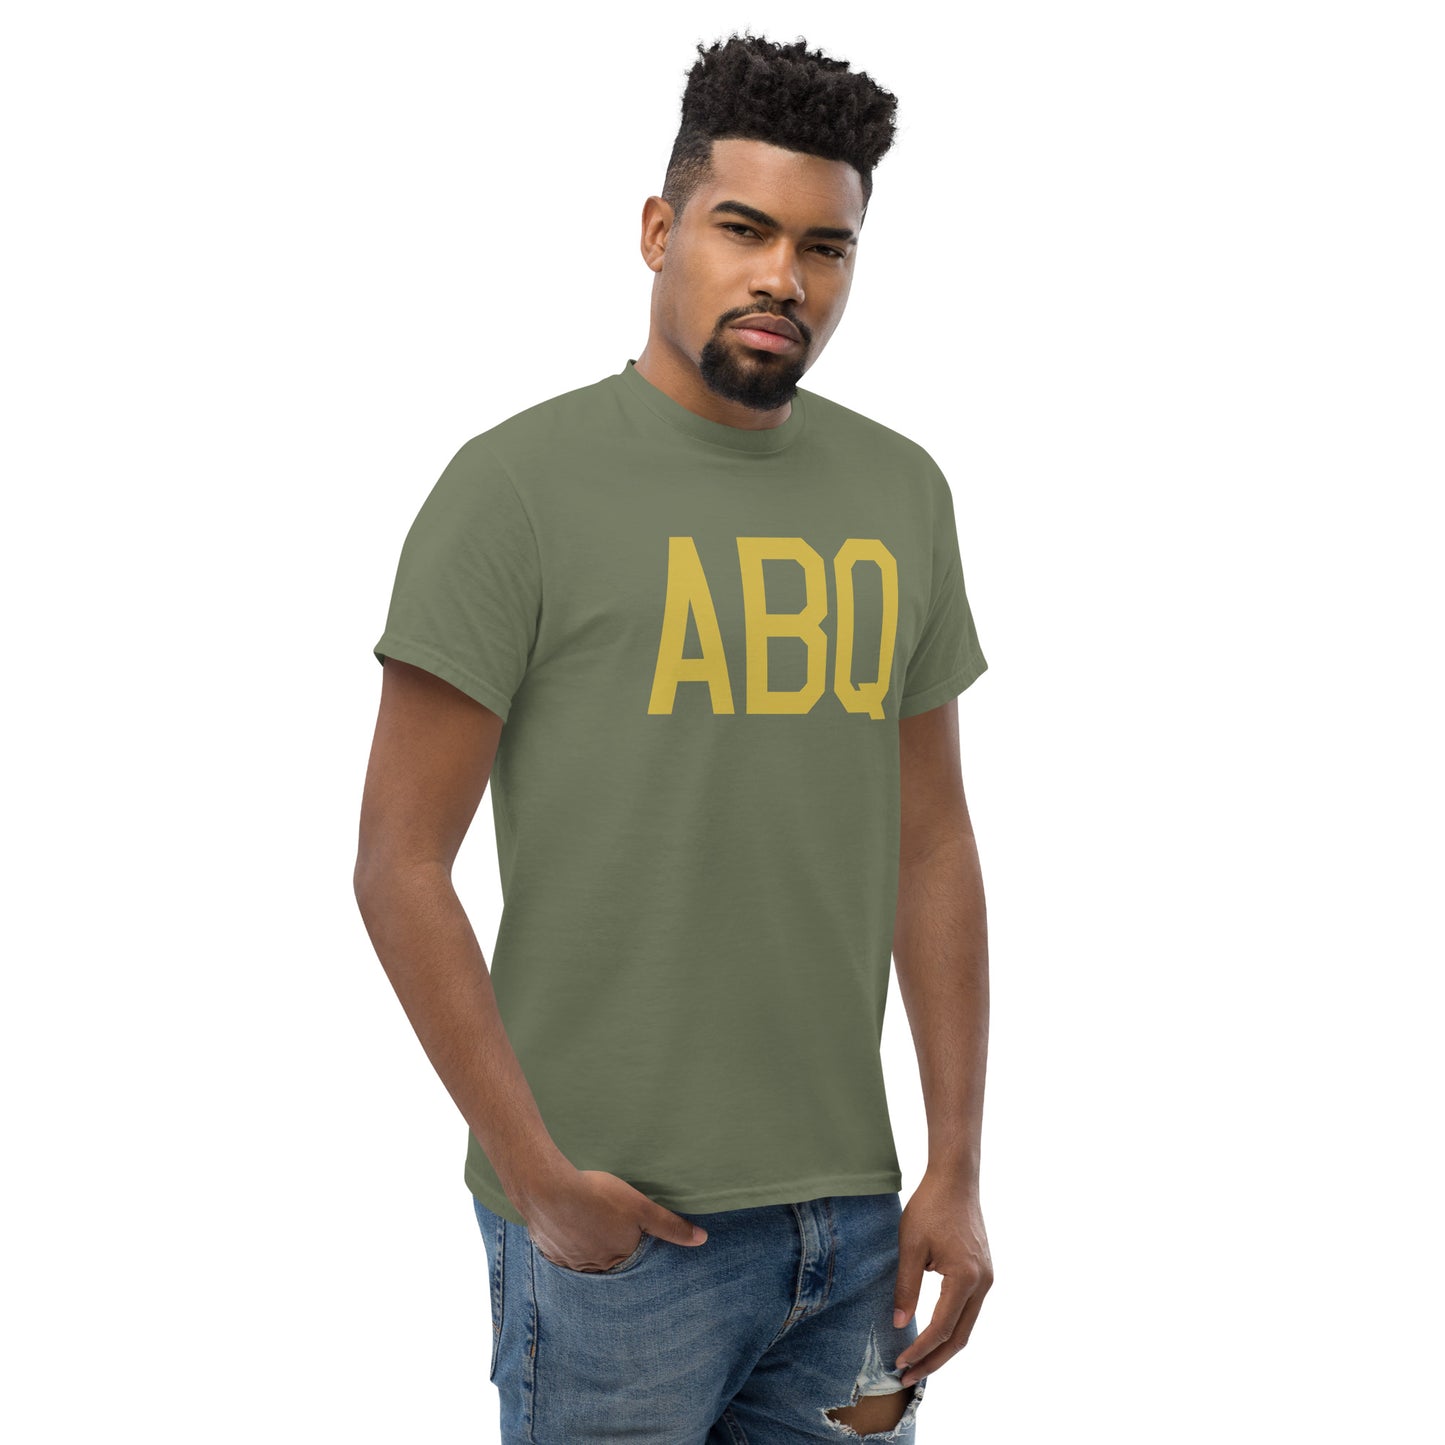 Aviation Enthusiast Men's Tee - Old Gold Graphic • ABQ Albuquerque • YHM Designs - Image 08